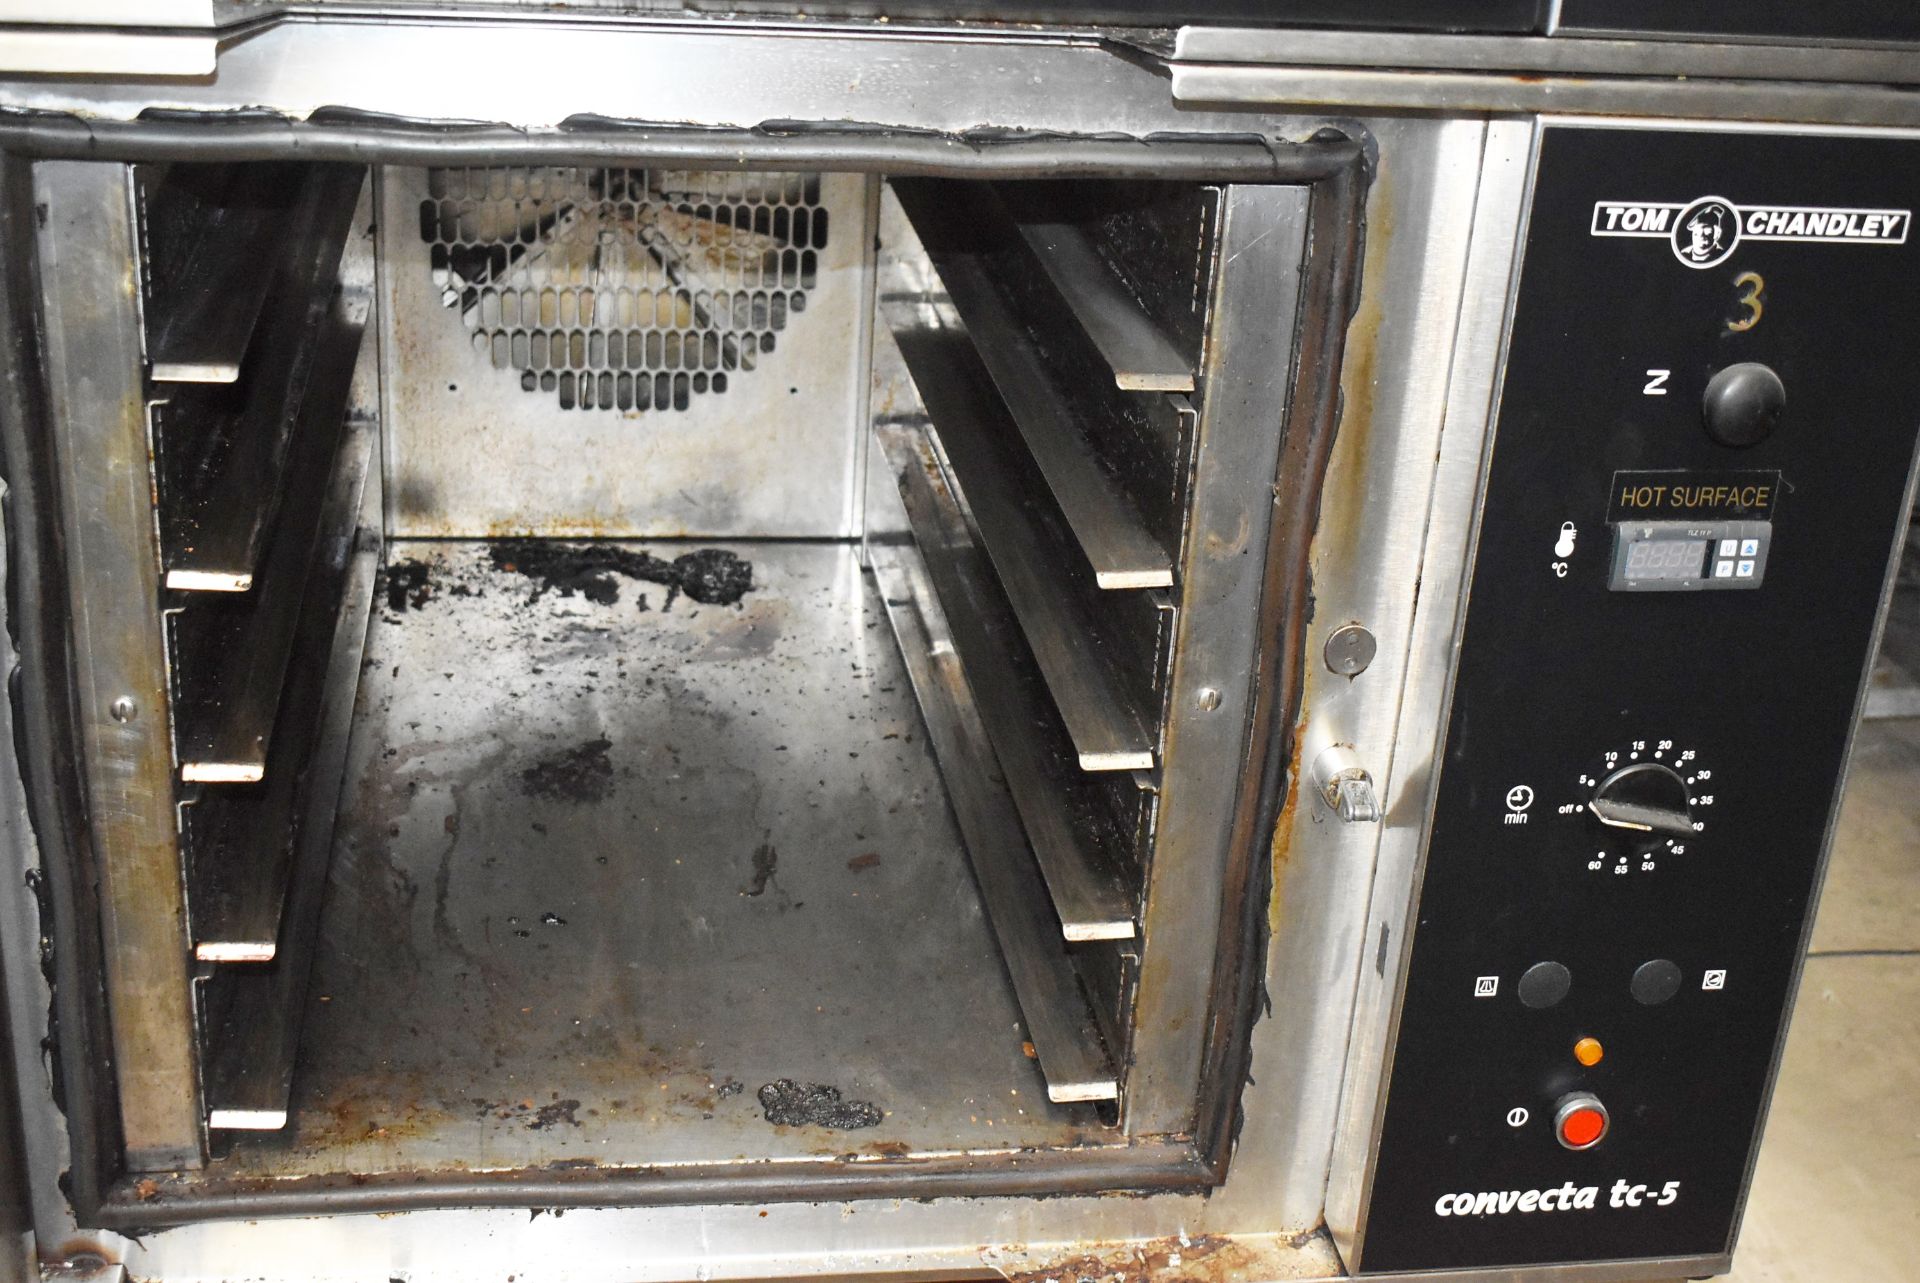 1 x Tom Chandley Double Door Bakey Oven - 3 Phase - Model TC53018 - Removed From Well Known - Image 5 of 8